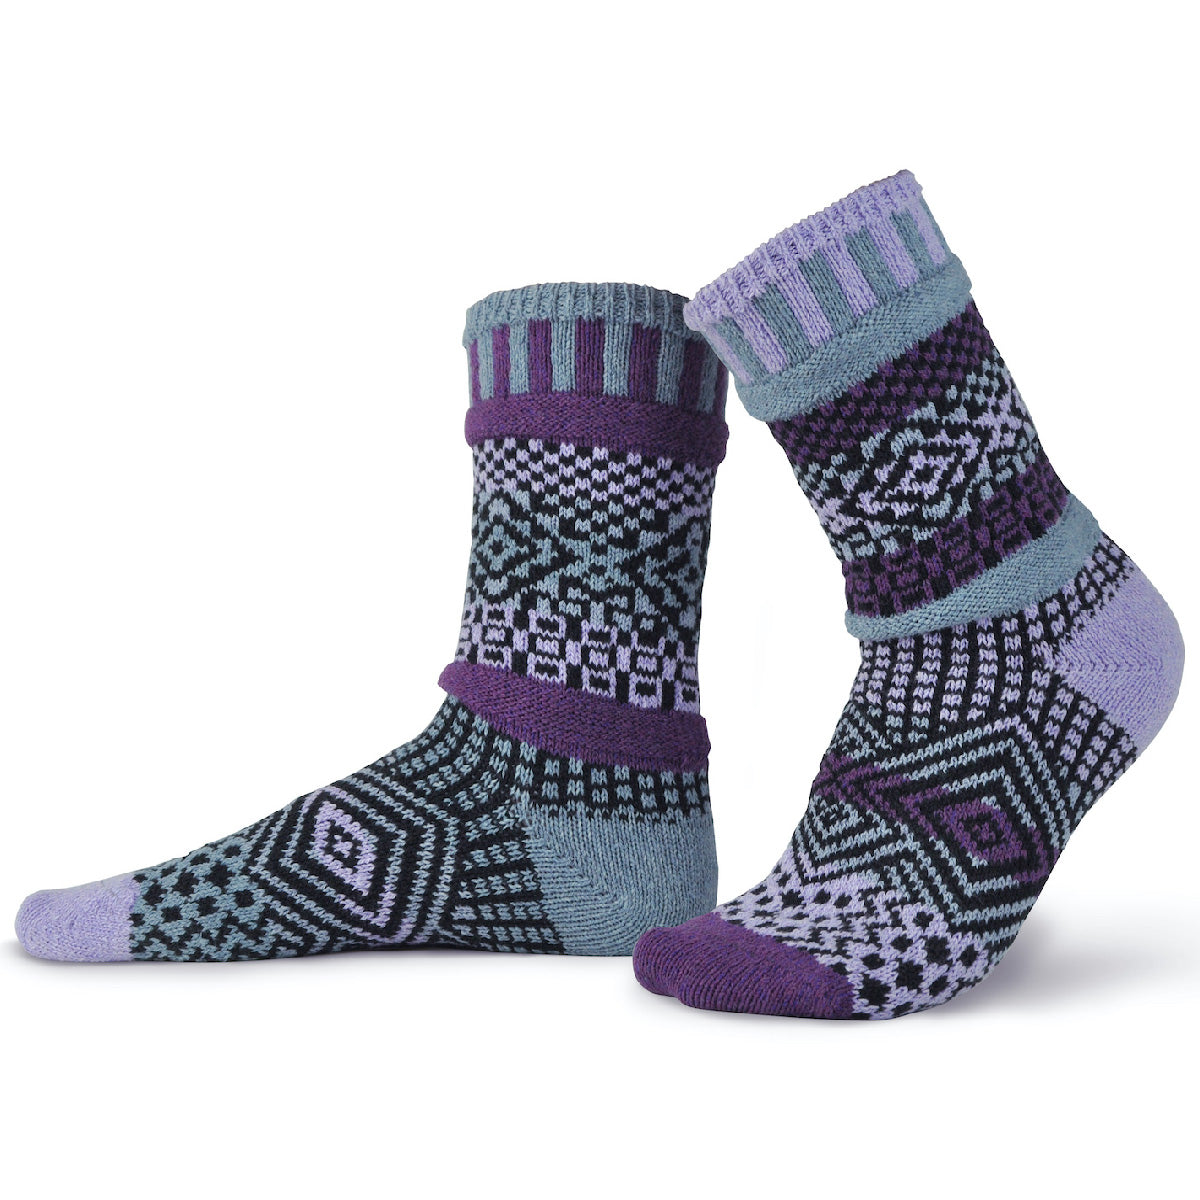 Funky patterned socks are intentionally mismatched and feature shades of dark purple, light purple, cool gray, and black!